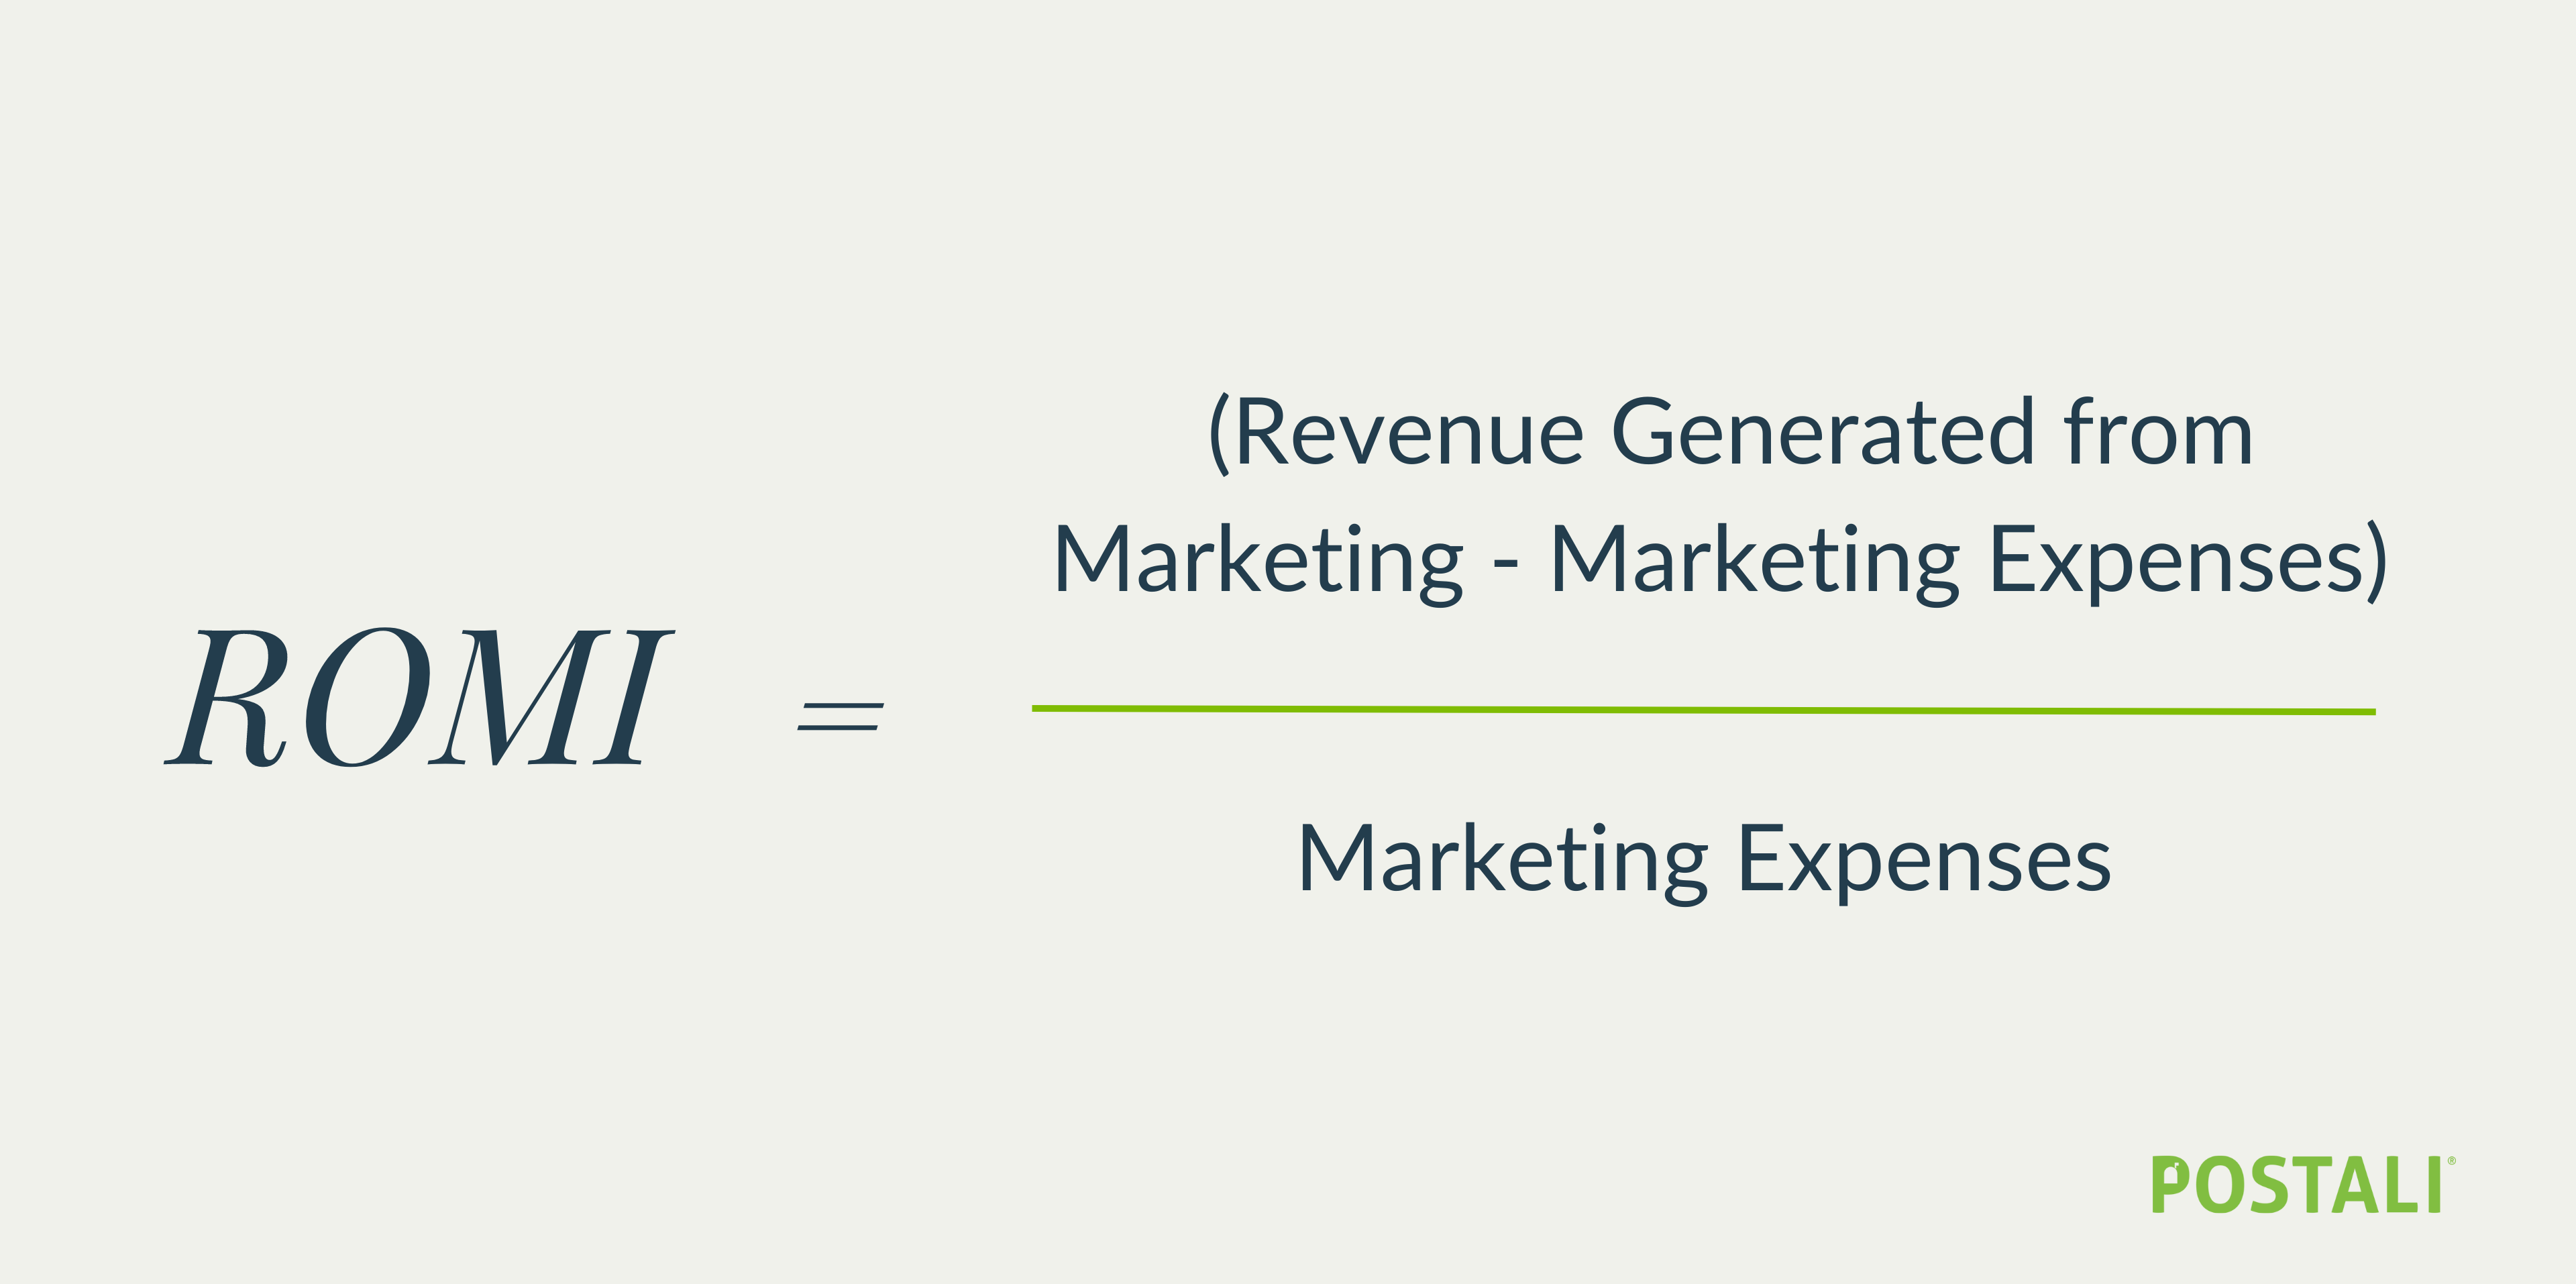 Graphic with equation: ROMI = (Revenue Generated from Marketing - Marketing Expenses) / Marketing Expenses